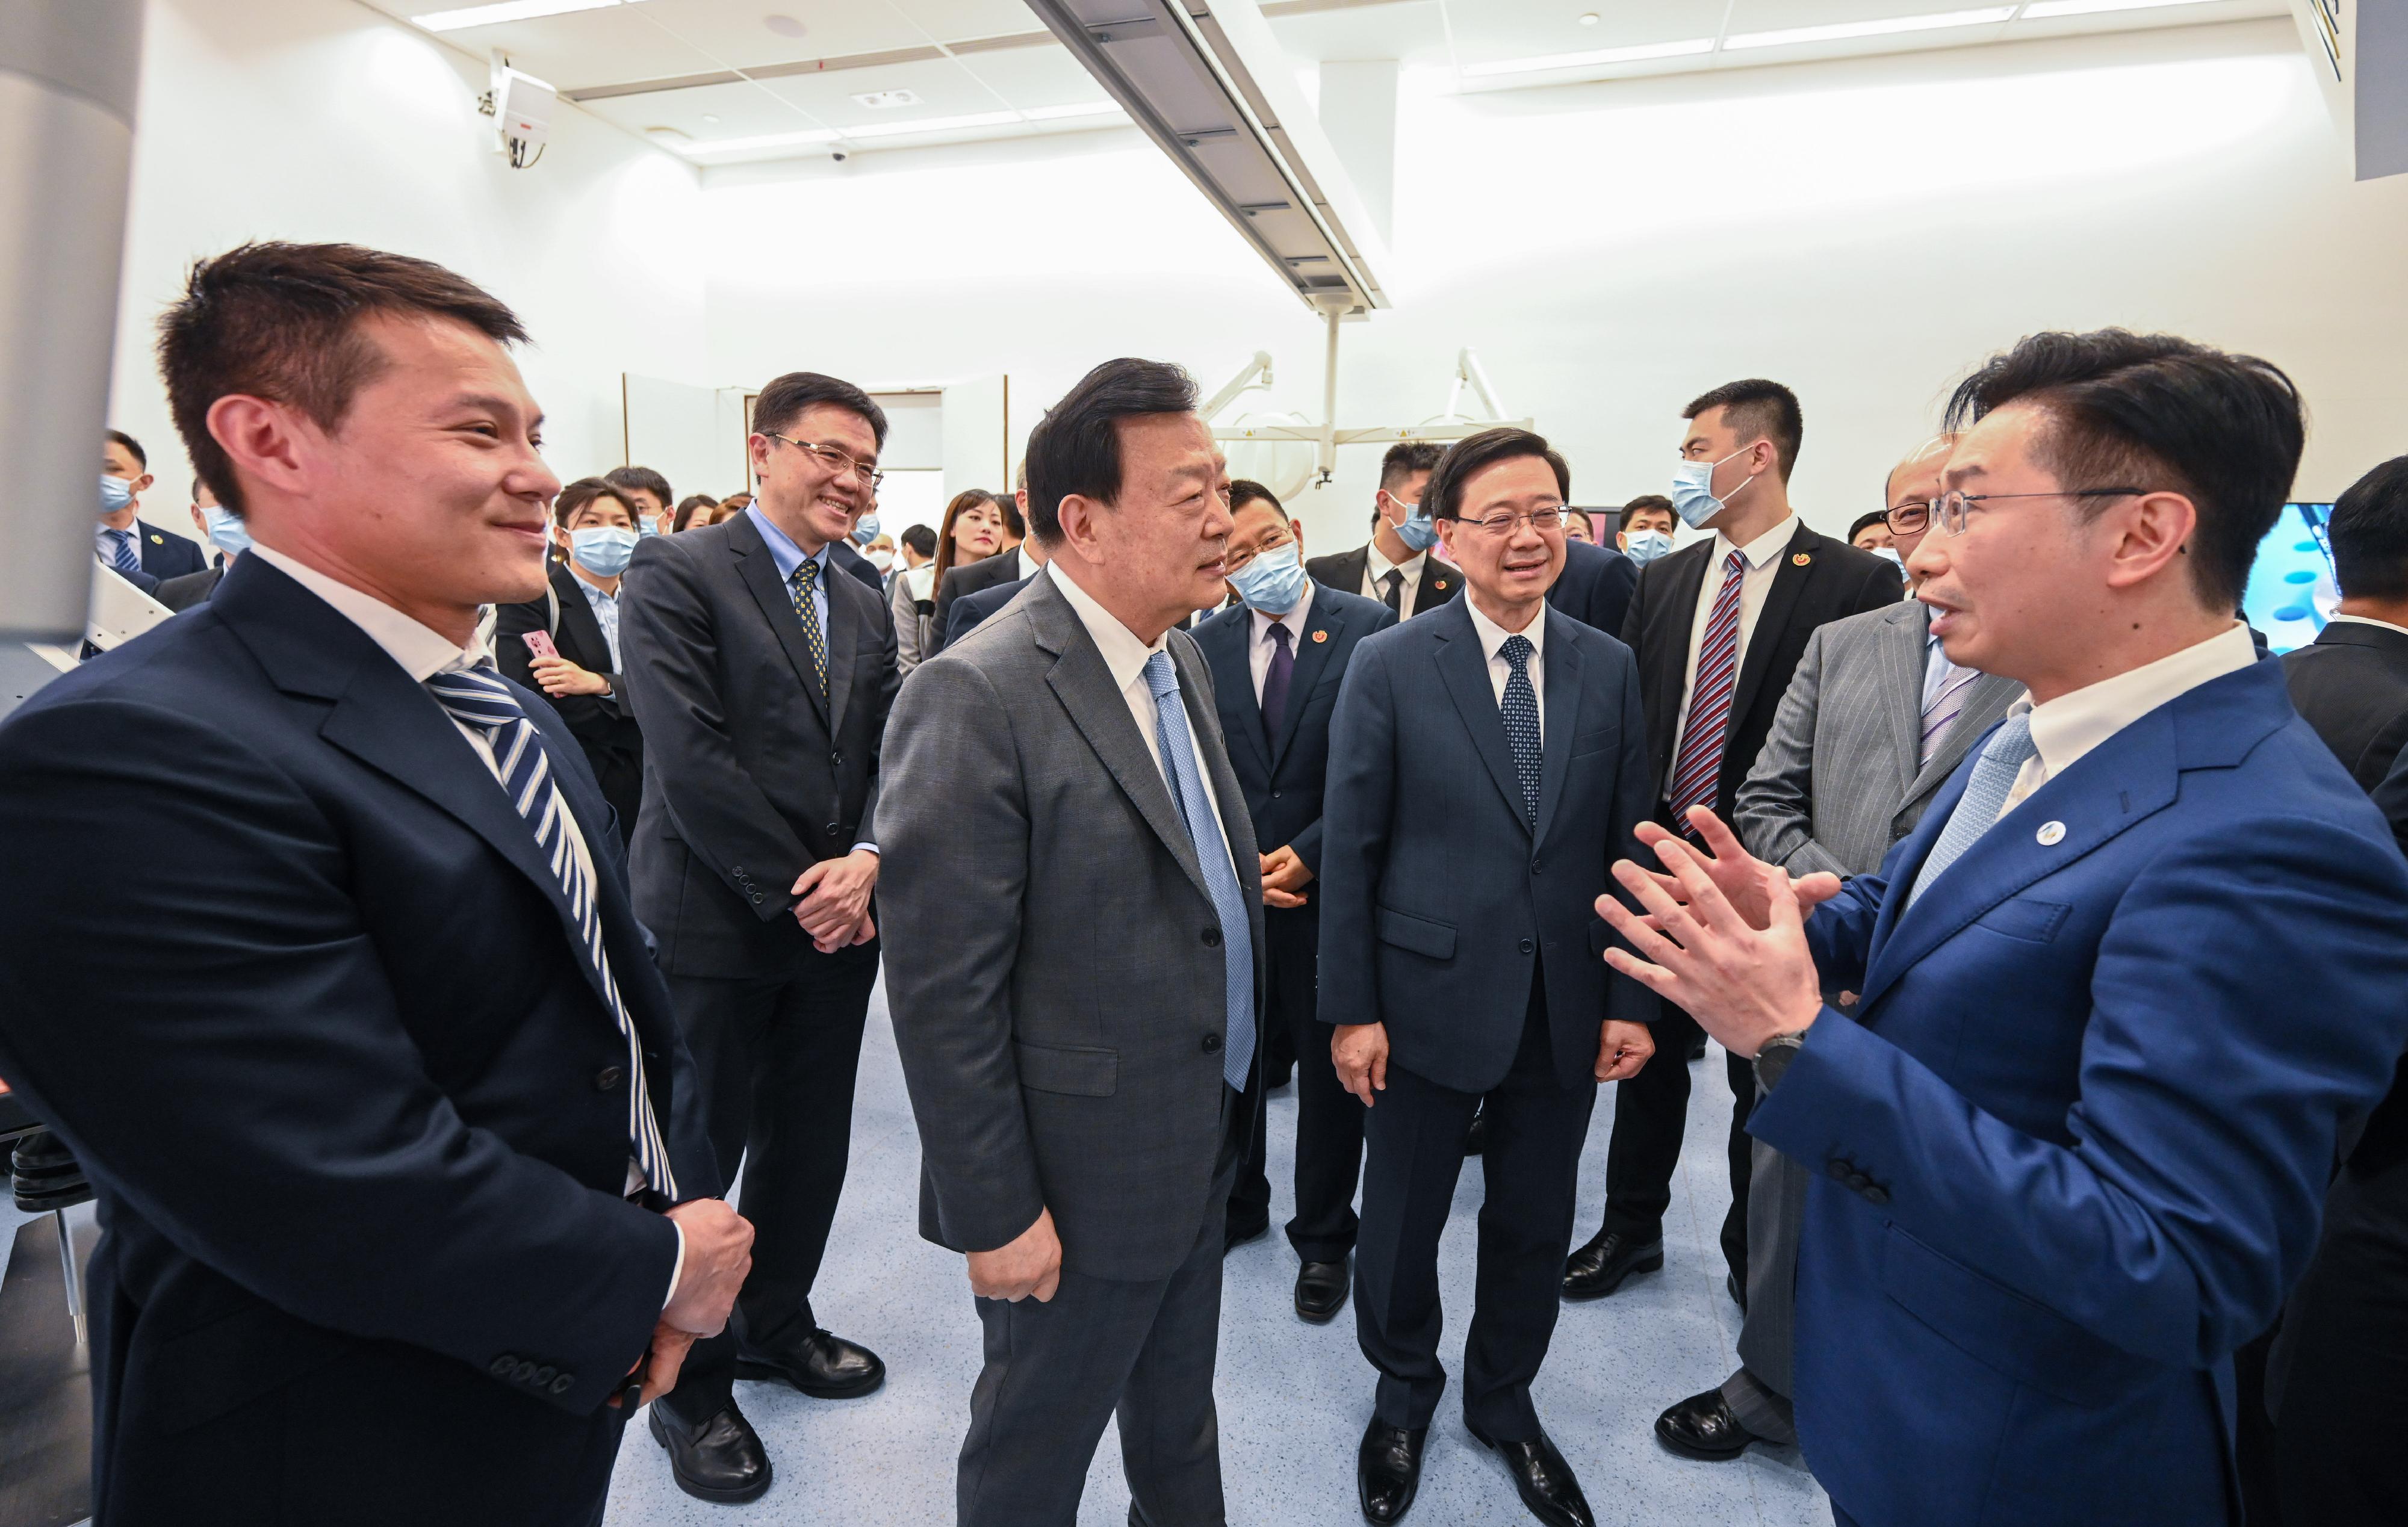 The Vice Chairman of the 13th Chinese People's Political Consultative Conference and Director of the Hong Kong and Macao Affairs Office of the State Council, Mr Xia Baolong, continued his visit in Hong Kong for a fifth day on April 17. Photo shows Mr Xia (centre), accompanied by the Chief Executive, Mr John Lee (second right), and the Secretary for Innovation, Technology and Industry, Professor Sun Dong (second left), visiting the Multi-Scale Medical Robotics Center at the research and development centre of InnoHK at the Hong Kong Science Park.